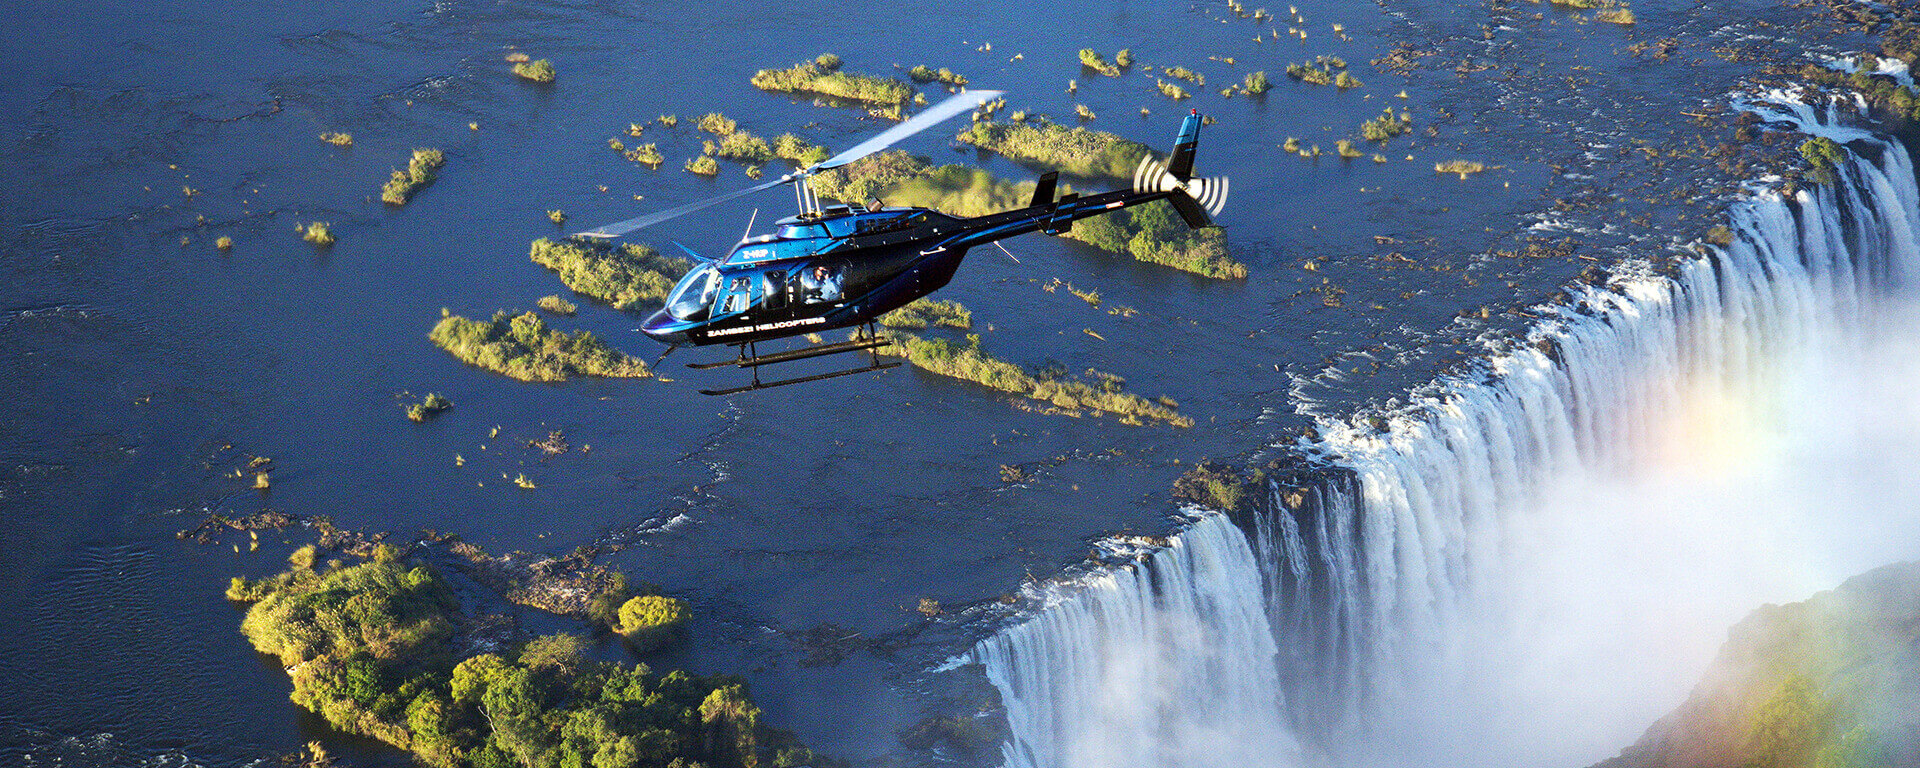 Victoria Falls Tour Packages